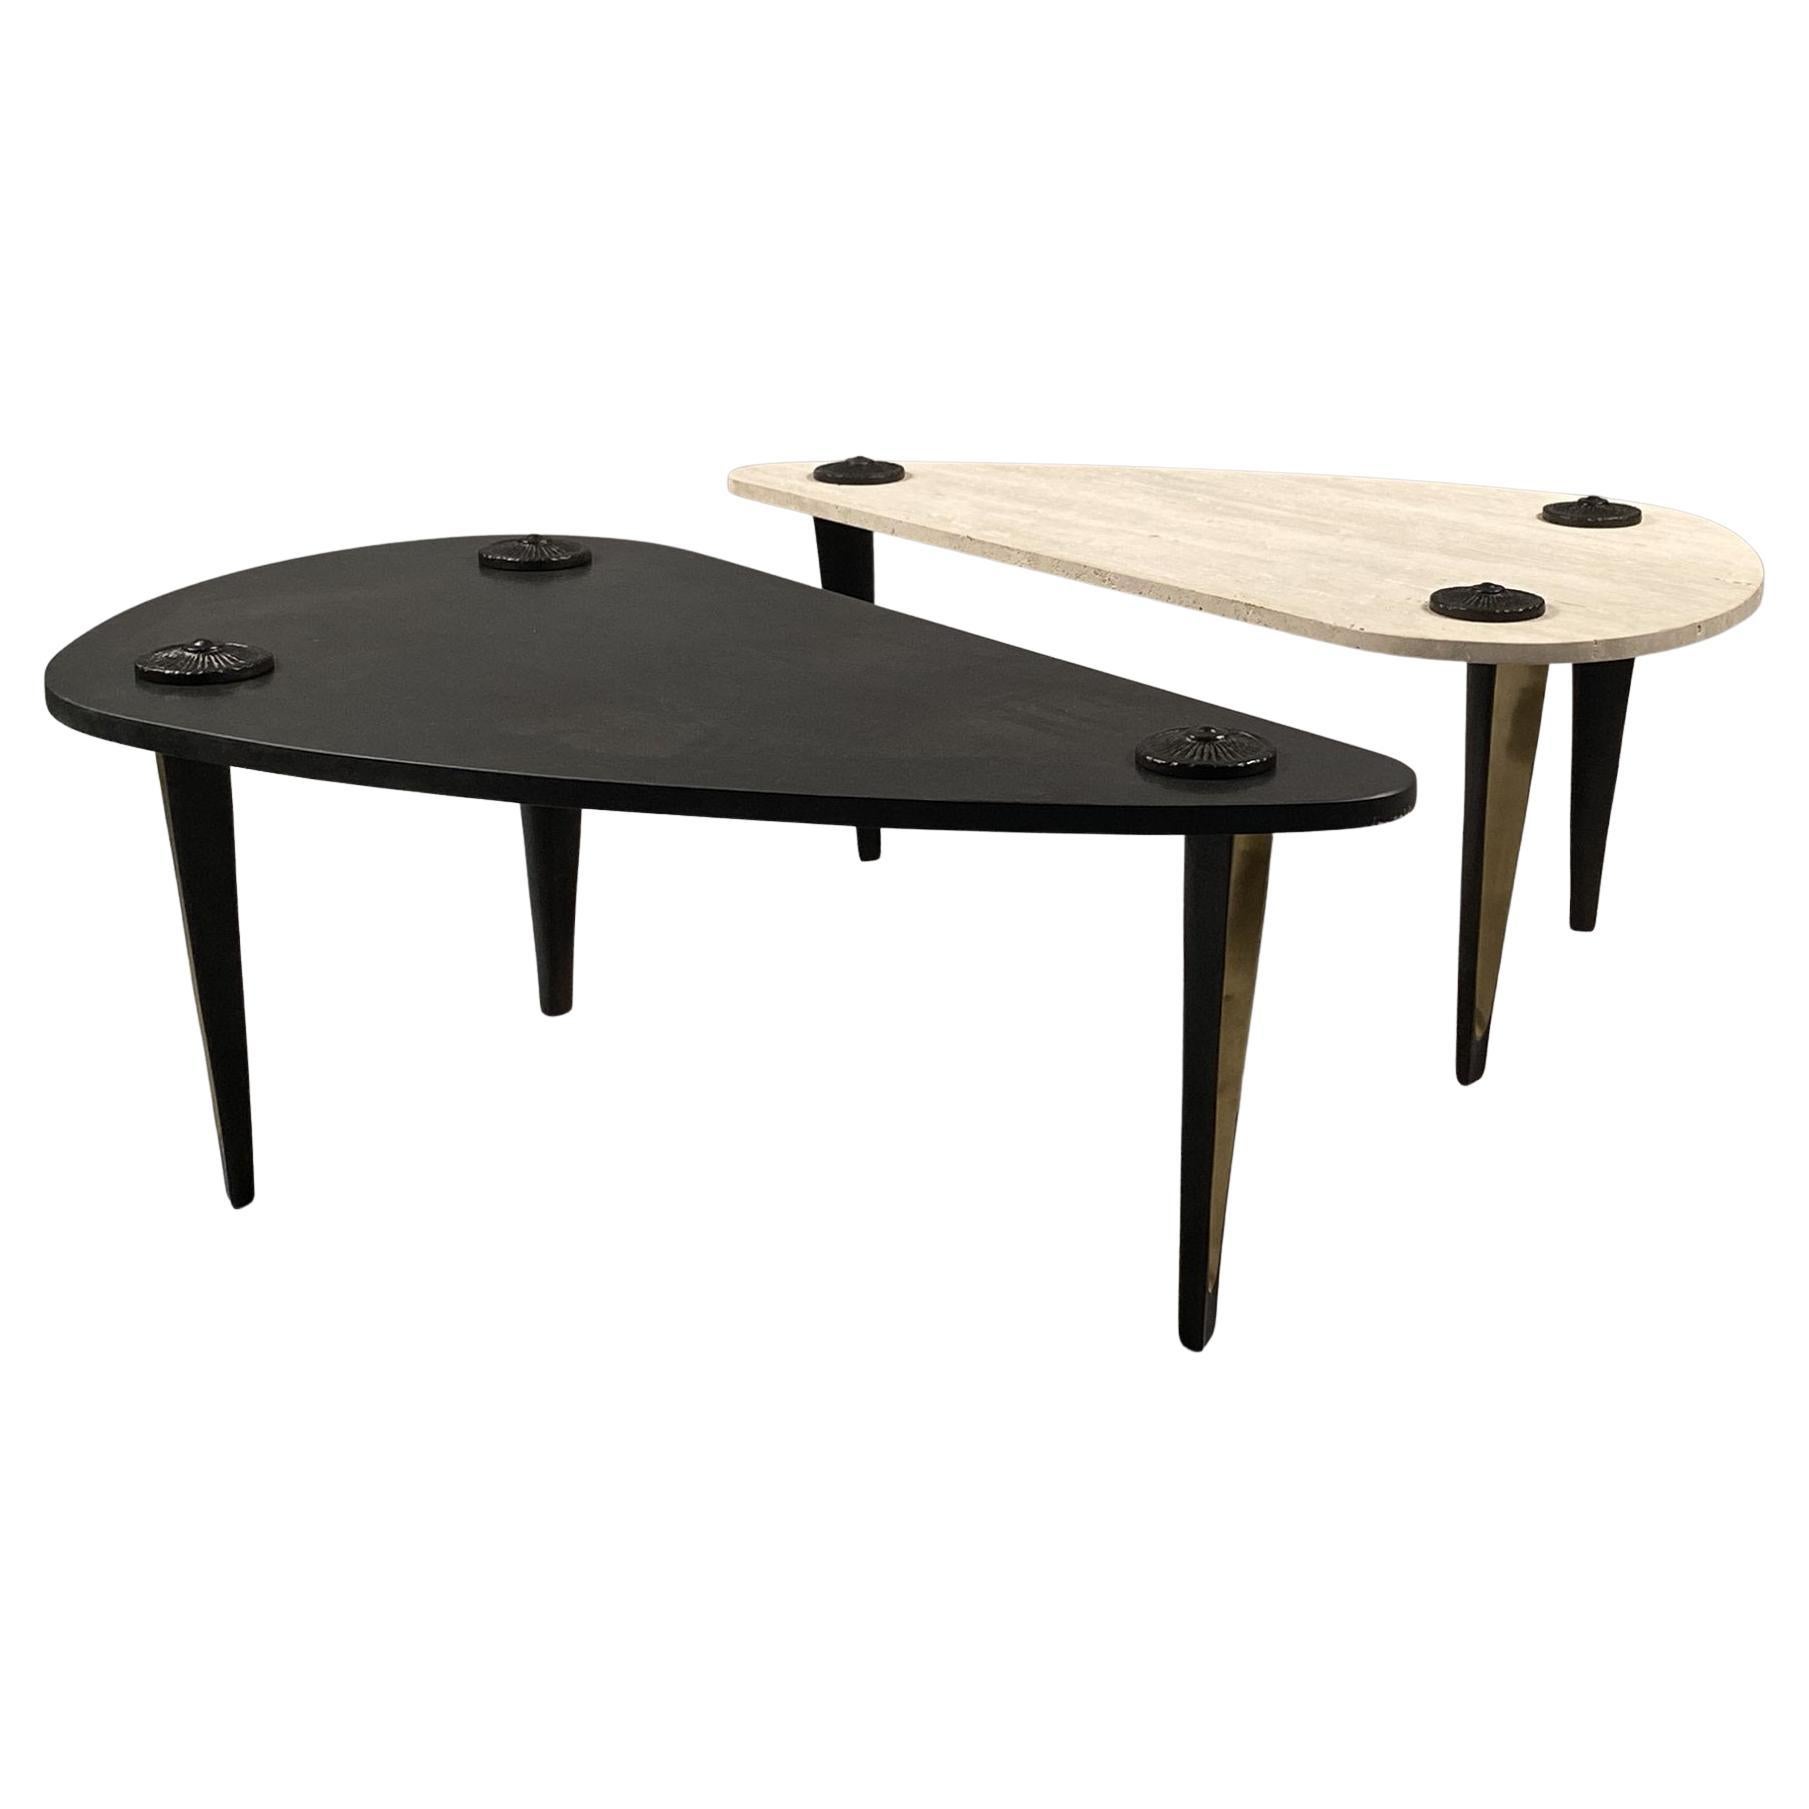 'TWIN' Coffee Tables For Sale